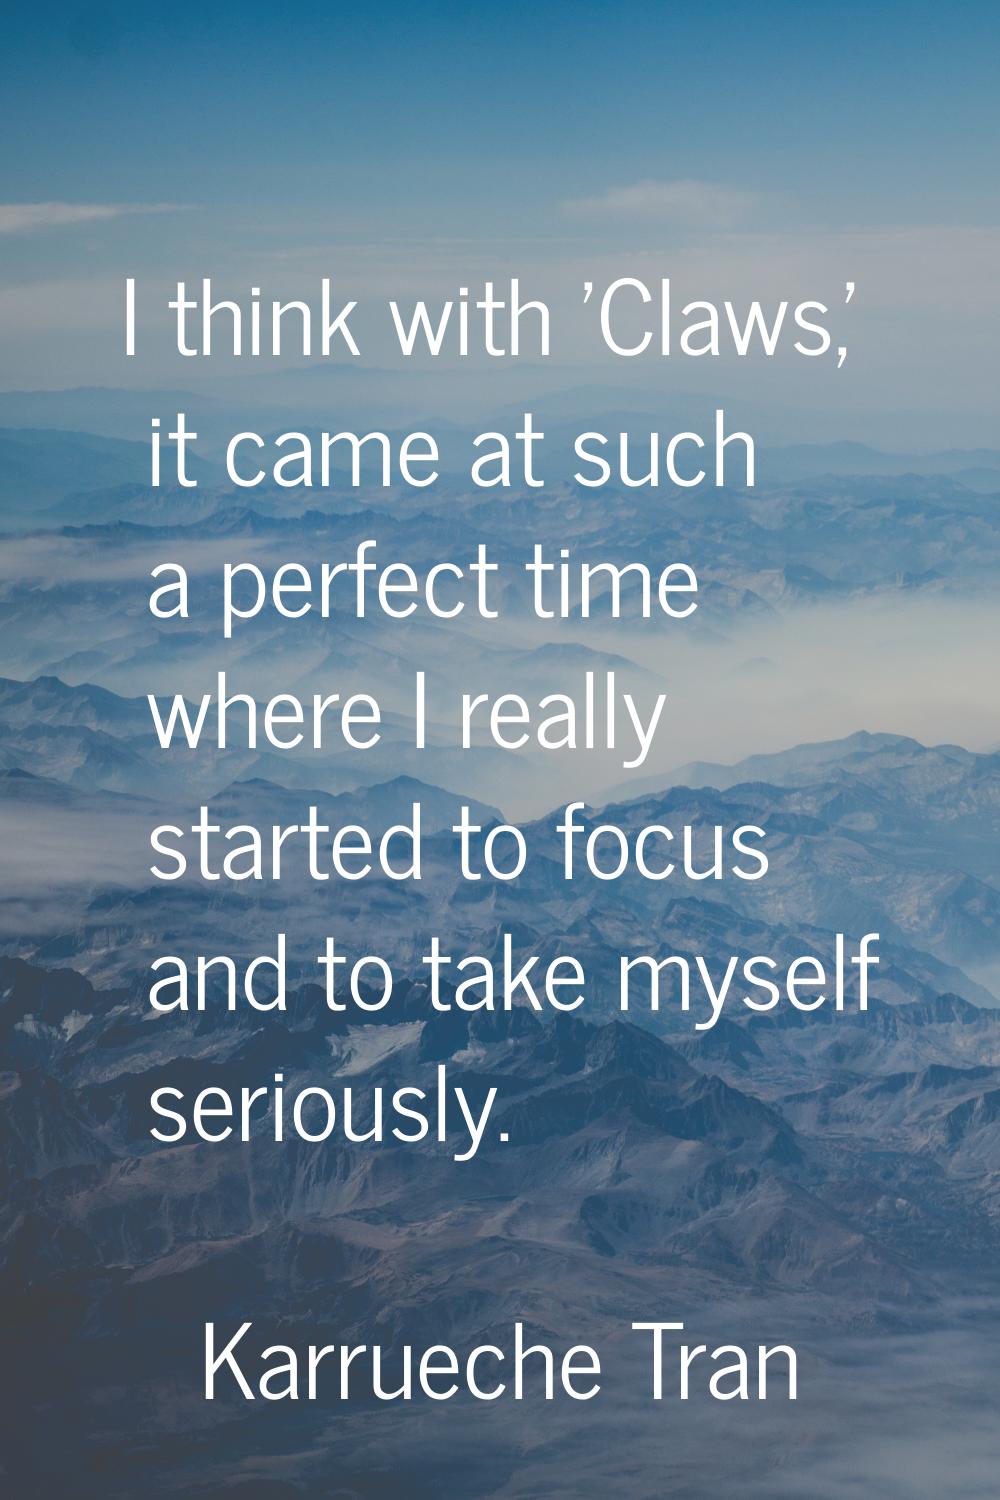 I think with 'Claws,' it came at such a perfect time where I really started to focus and to take my